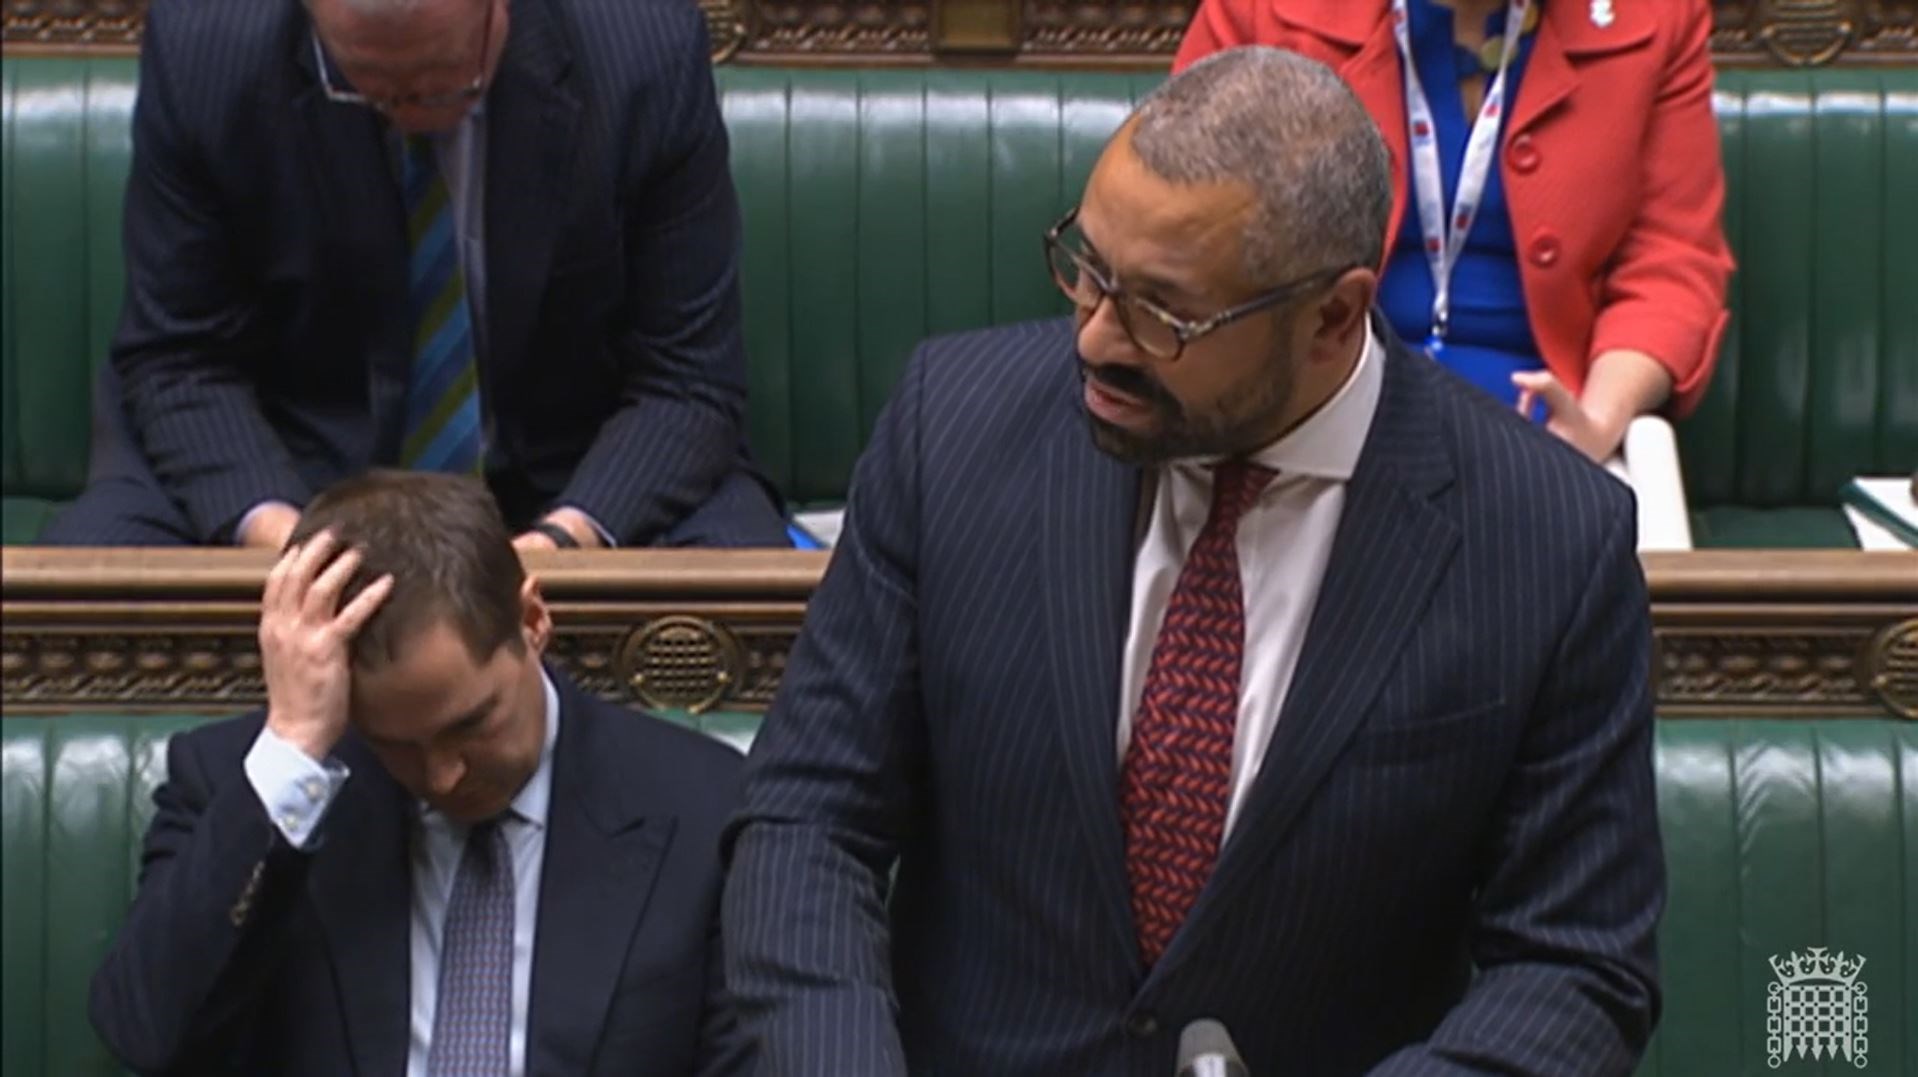 James Cleverly speaks during Home Office questions in the House of Commons (House of Commons/UK Parliament/PA)